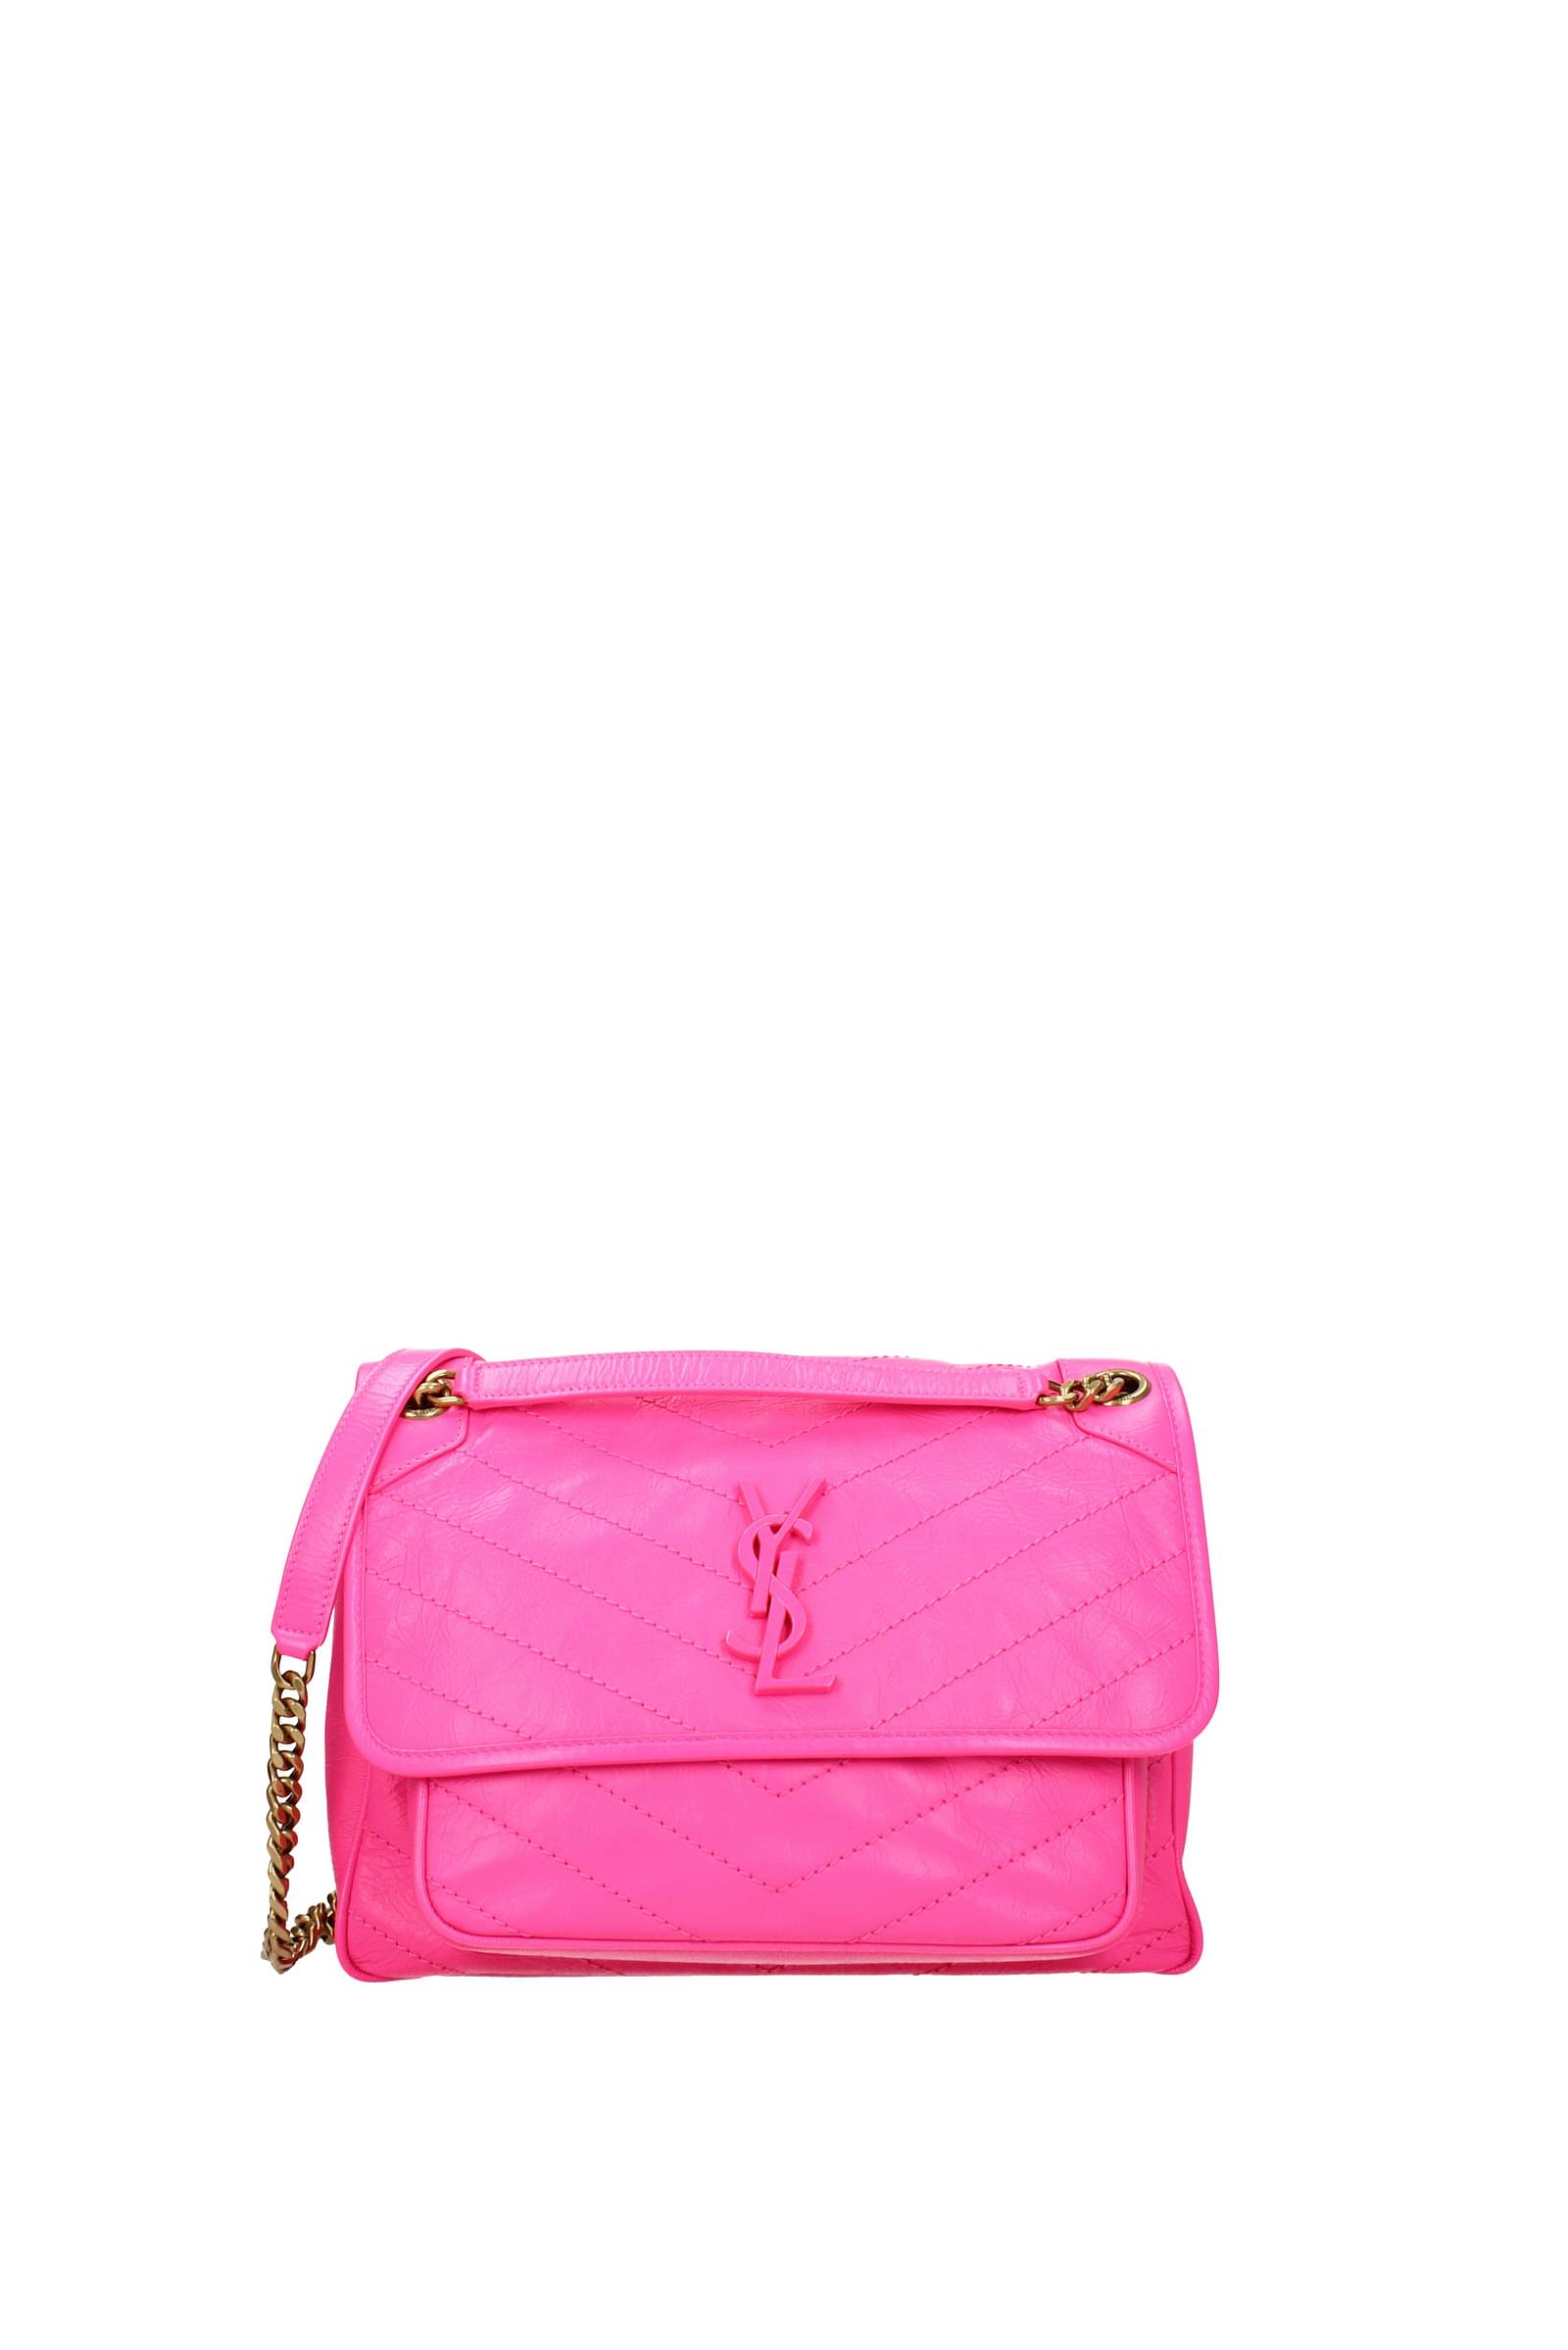 YSL Pink Purse Leather in Pakistan for woman - PlazzaPK Lifestyle